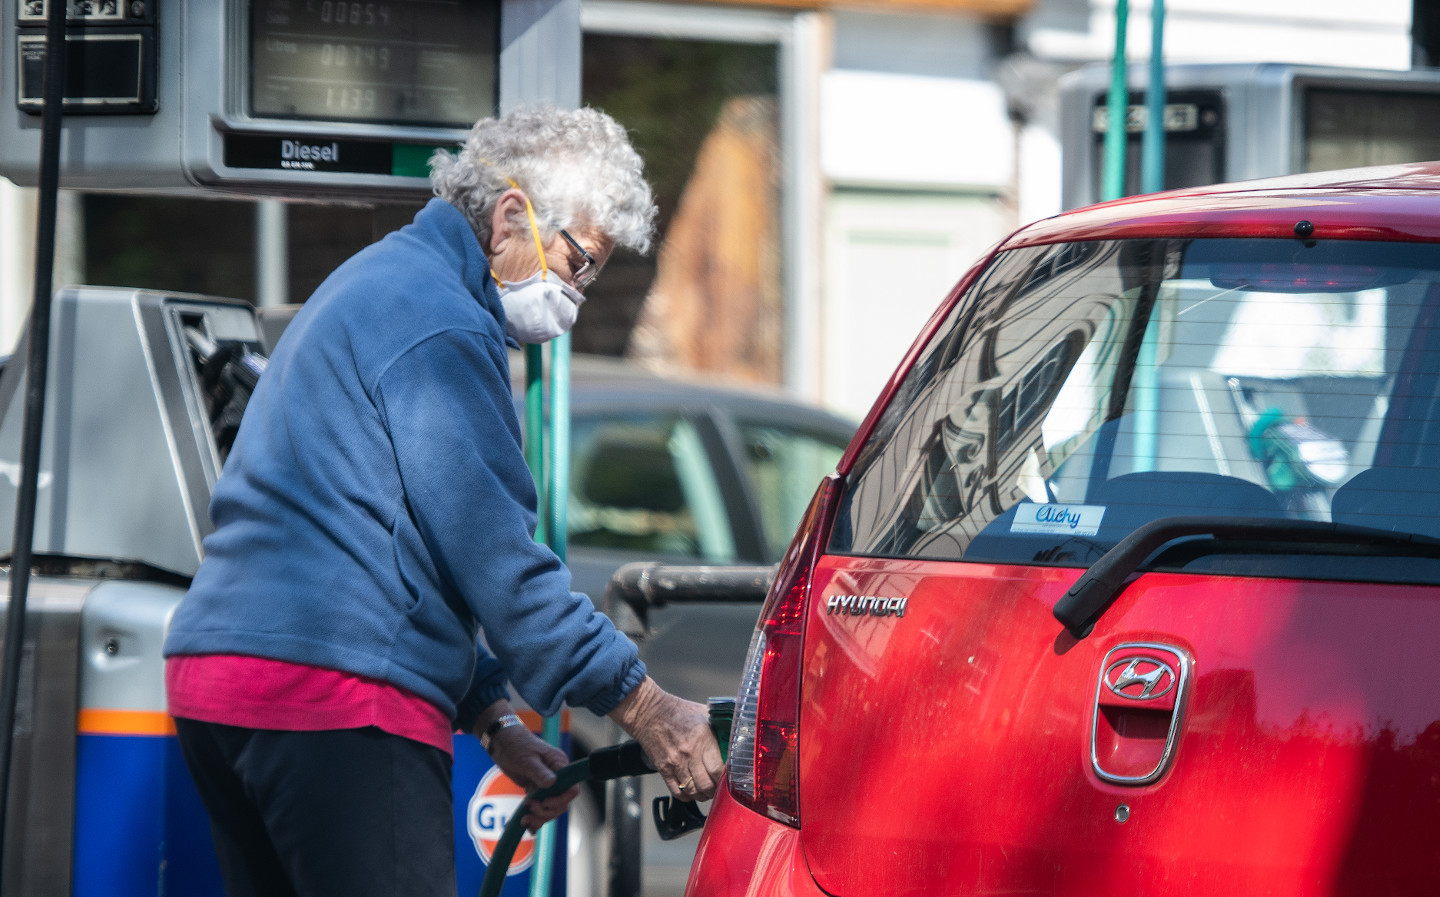 Cost of refuelling a car at lowest for four years